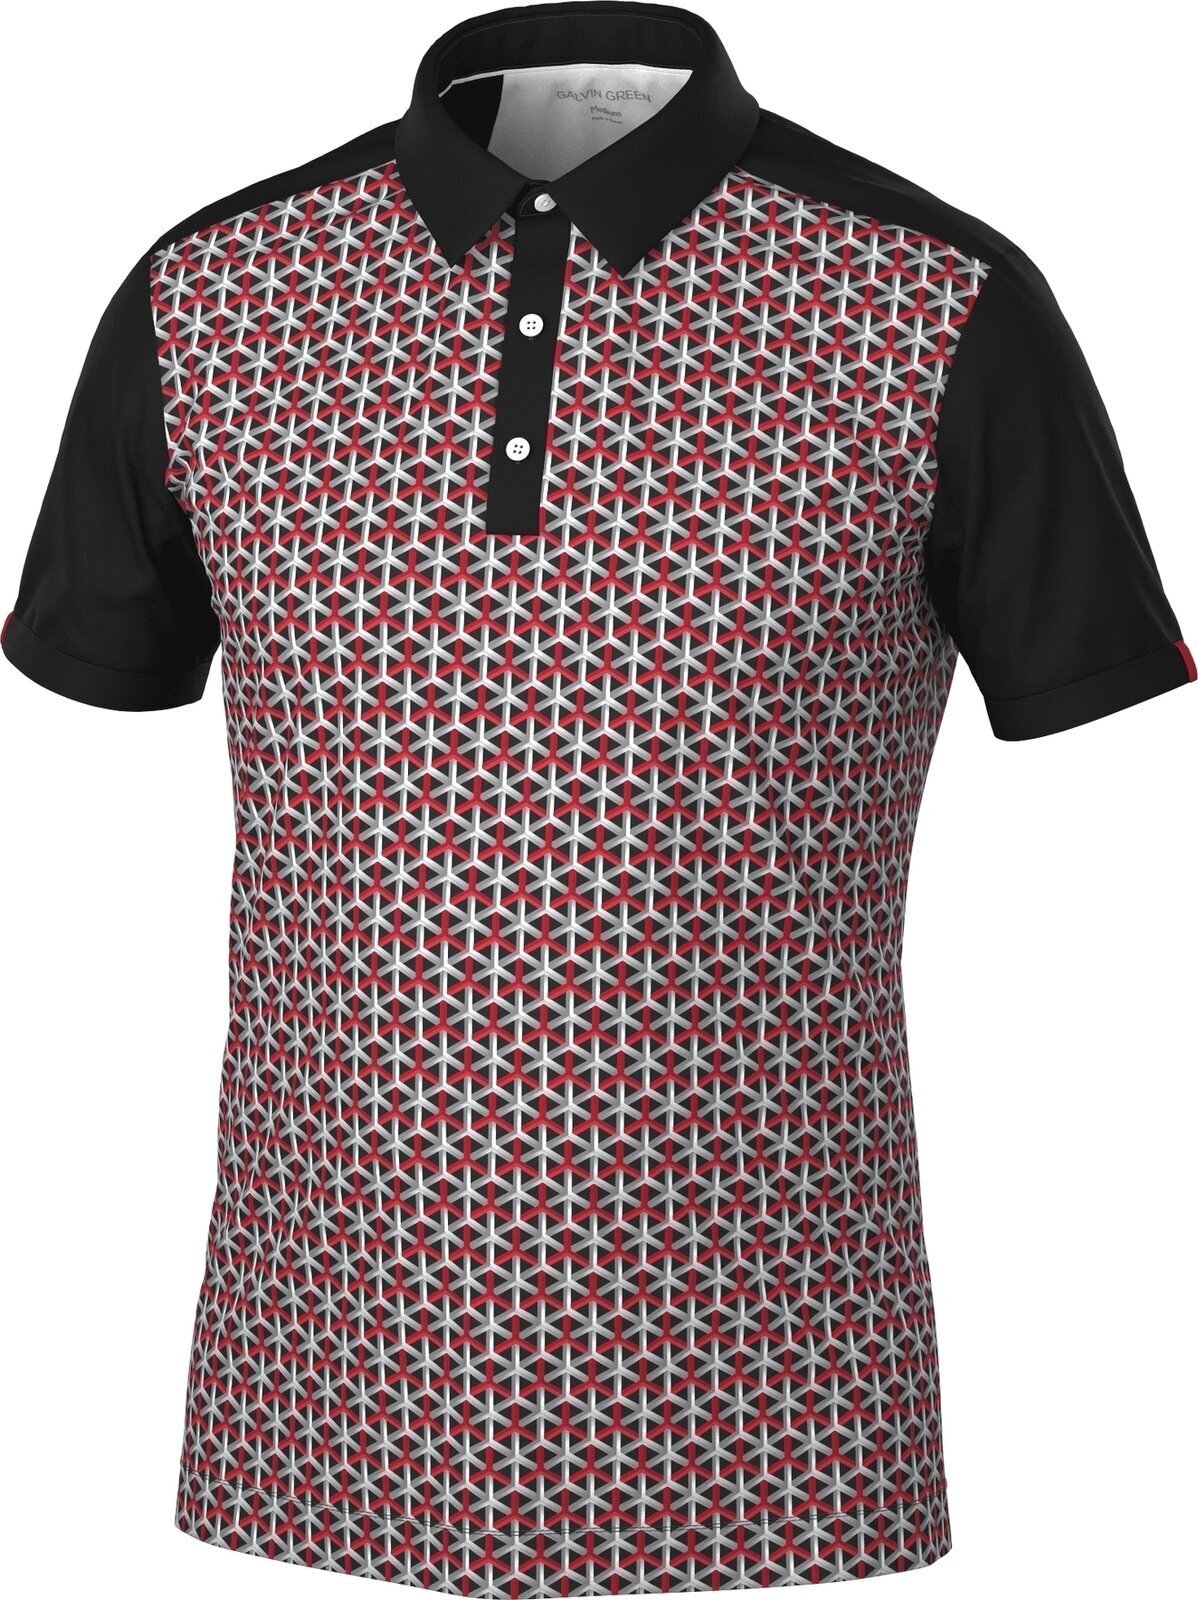 Polo trøje Galvin Green Mio Mens Breathable Short Sleeve Shirt Red/Black 2XL